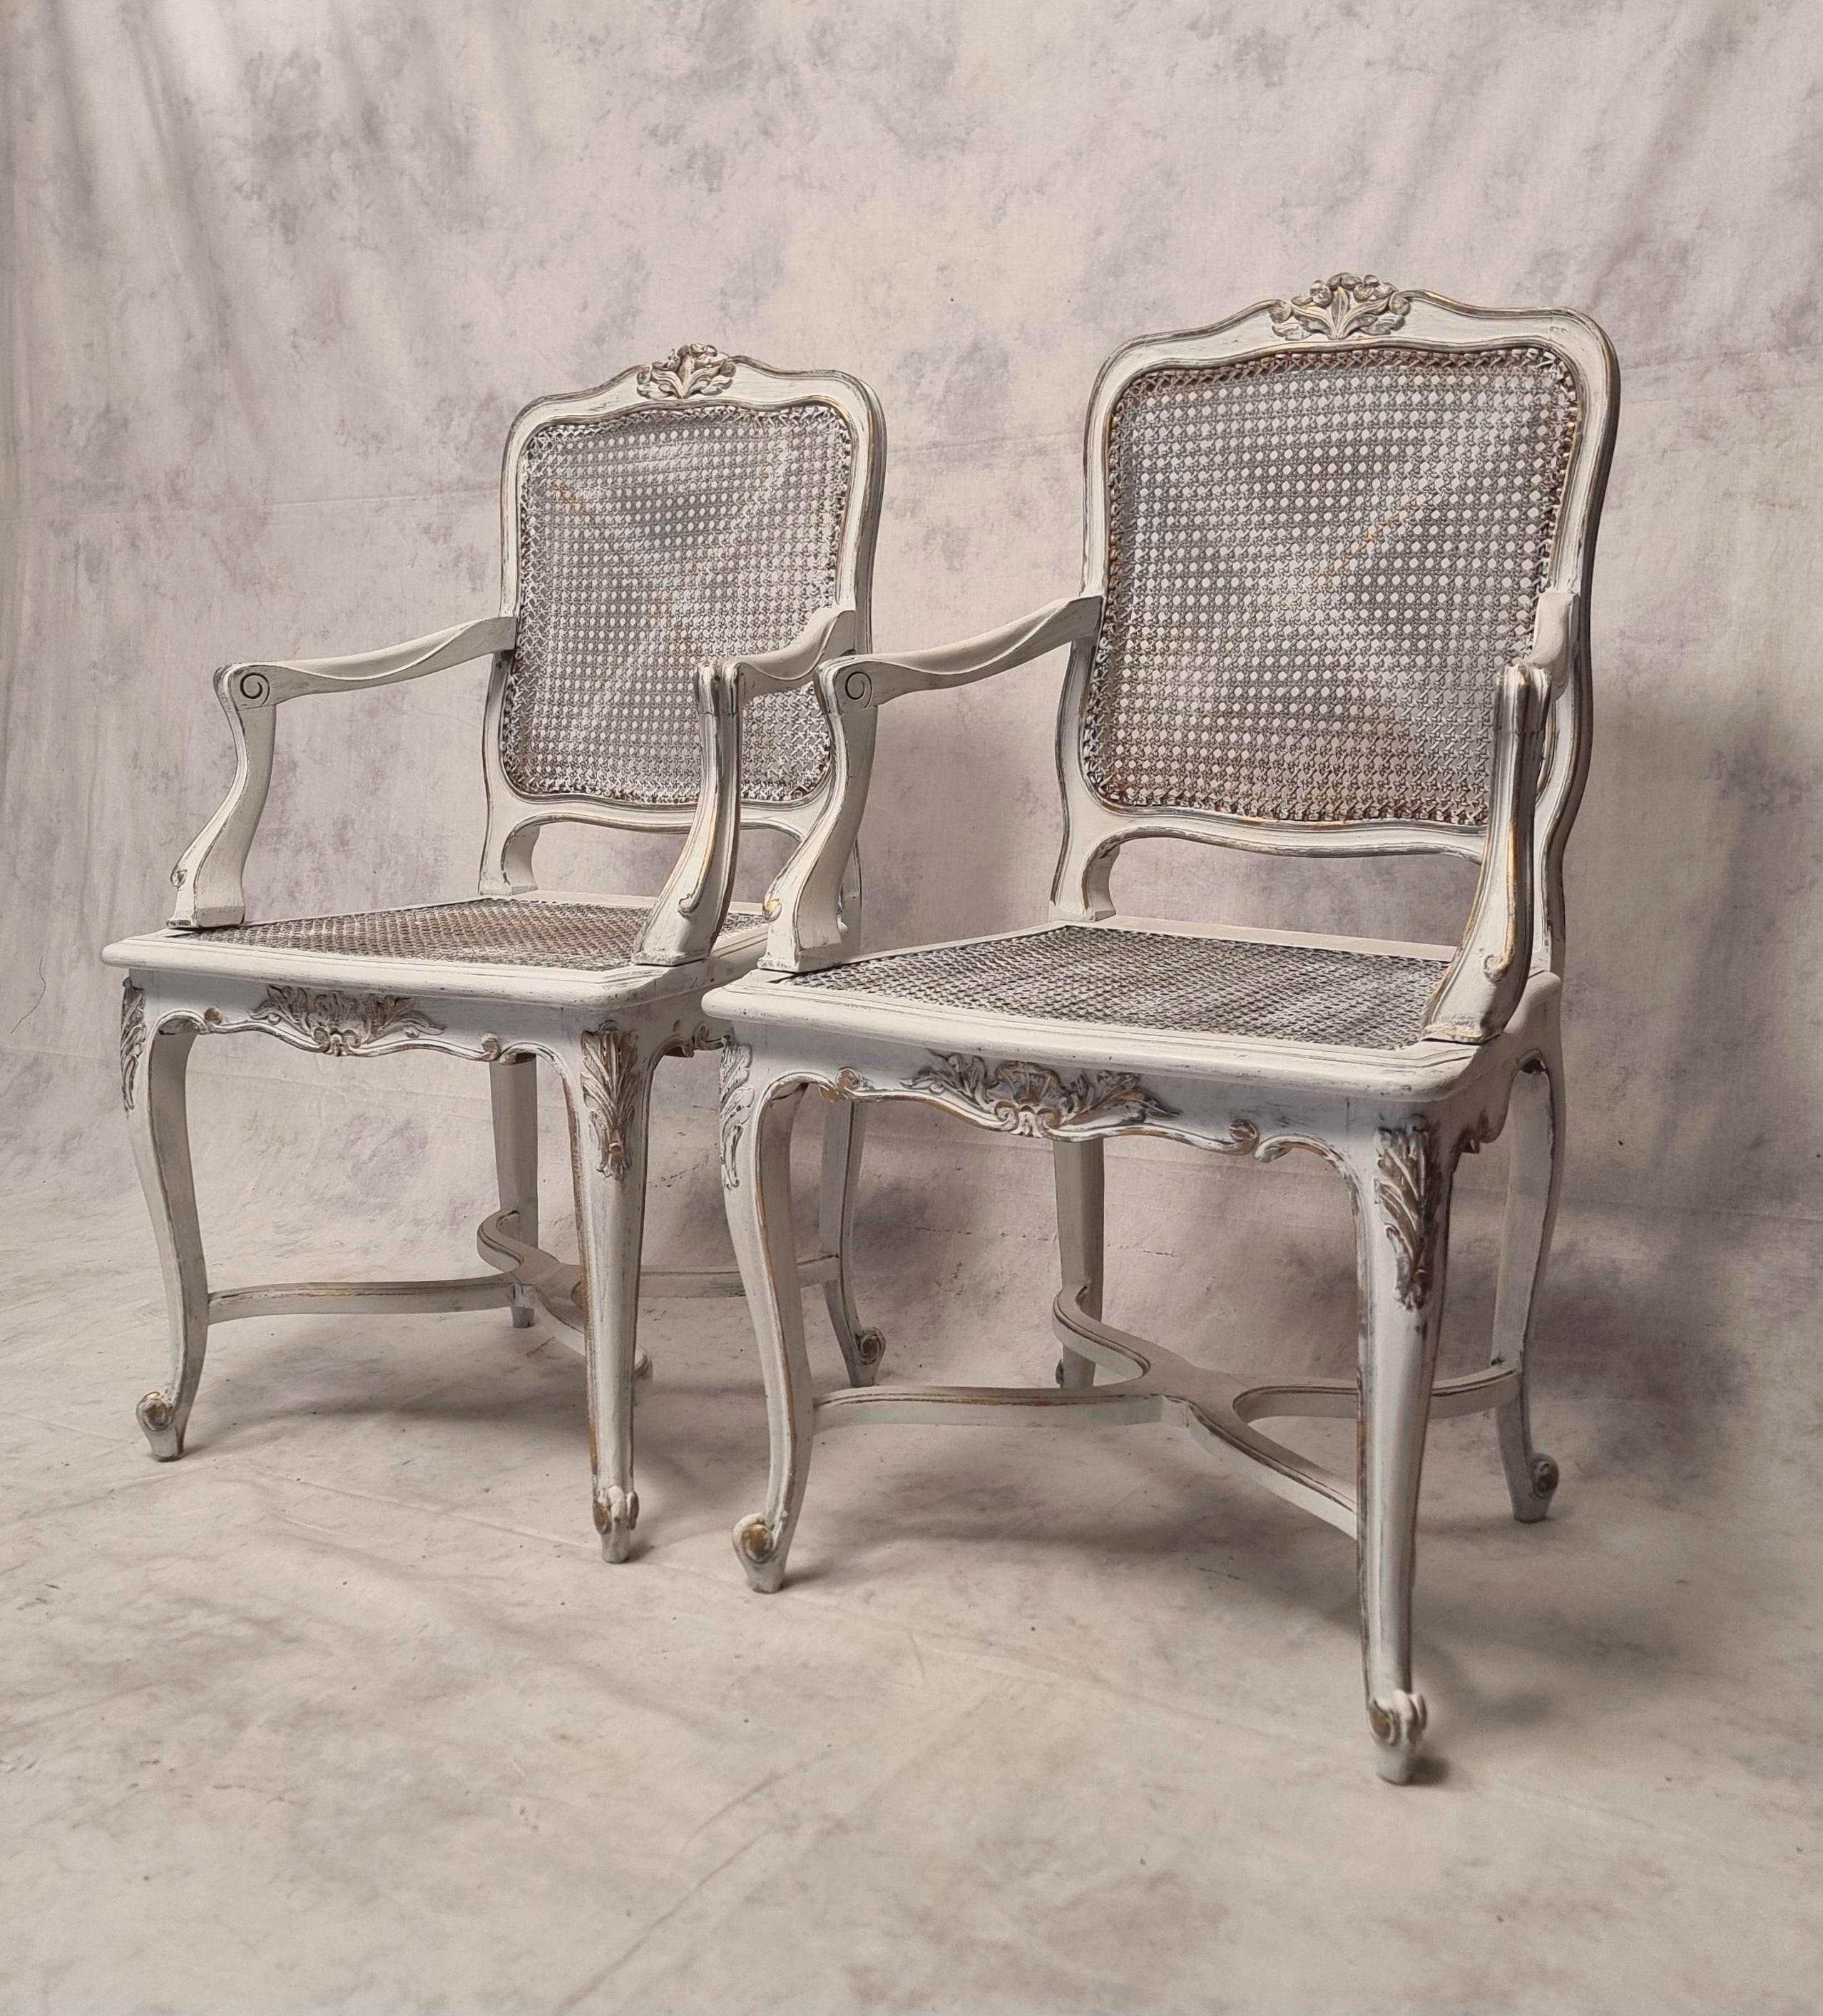 Pair of Regency style caned armchairs from the end of the 19th century. Iconic model of the Regency style, these armchairs have curved cross-shaped legs. It's armchairs are nicely animated and full of dynamism. Both the seat and the backrest are